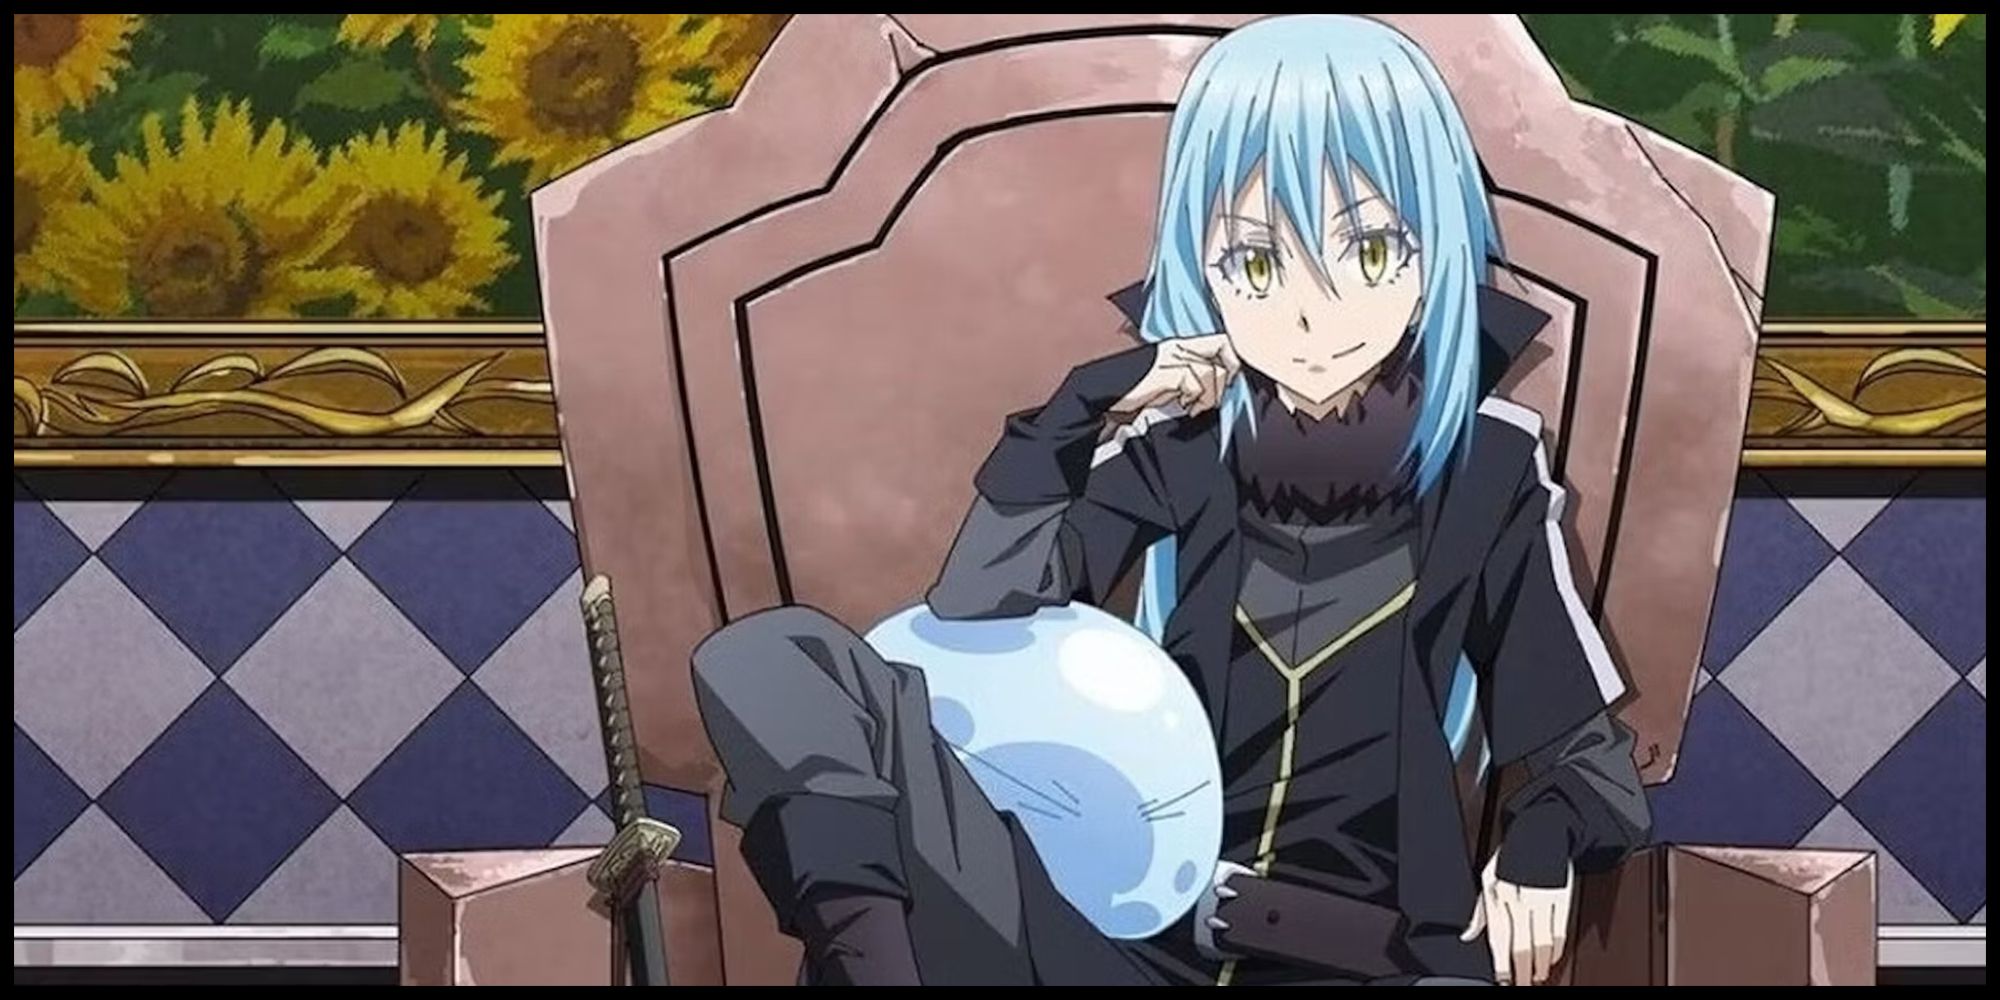 That Time I Got Reincarnated As A Slime Rimuru As Human and as Slime